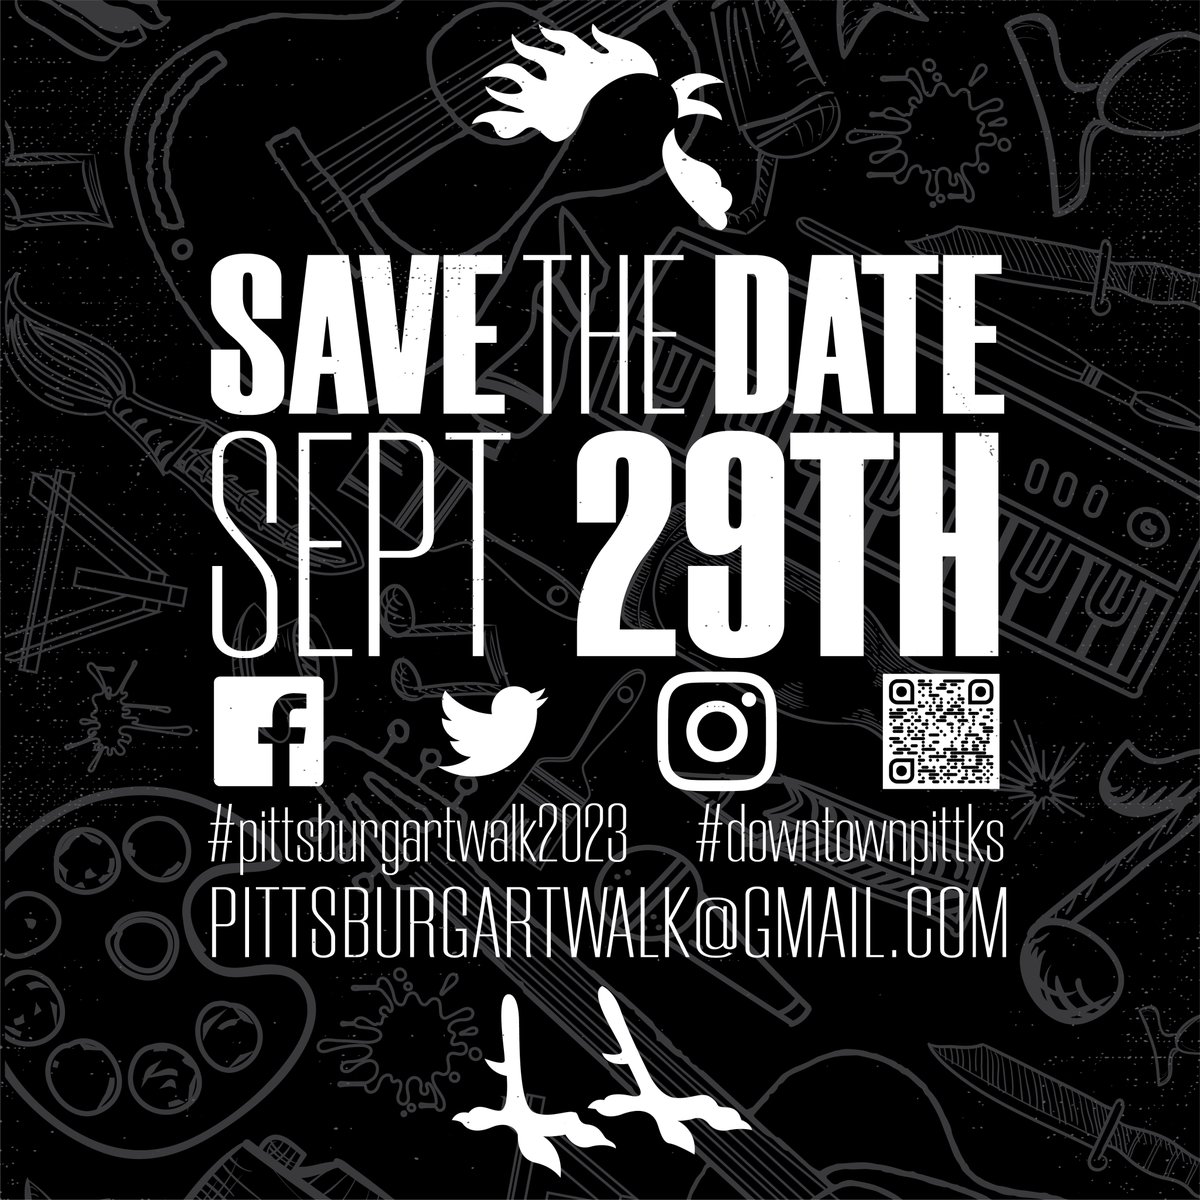 📣 📣 SAVE THE DATES FOR 2023!!! 📣 📣
Plenty of time to create those one-of-a-kind pieces for thousands to peruse on the streets of #downtownpittks!